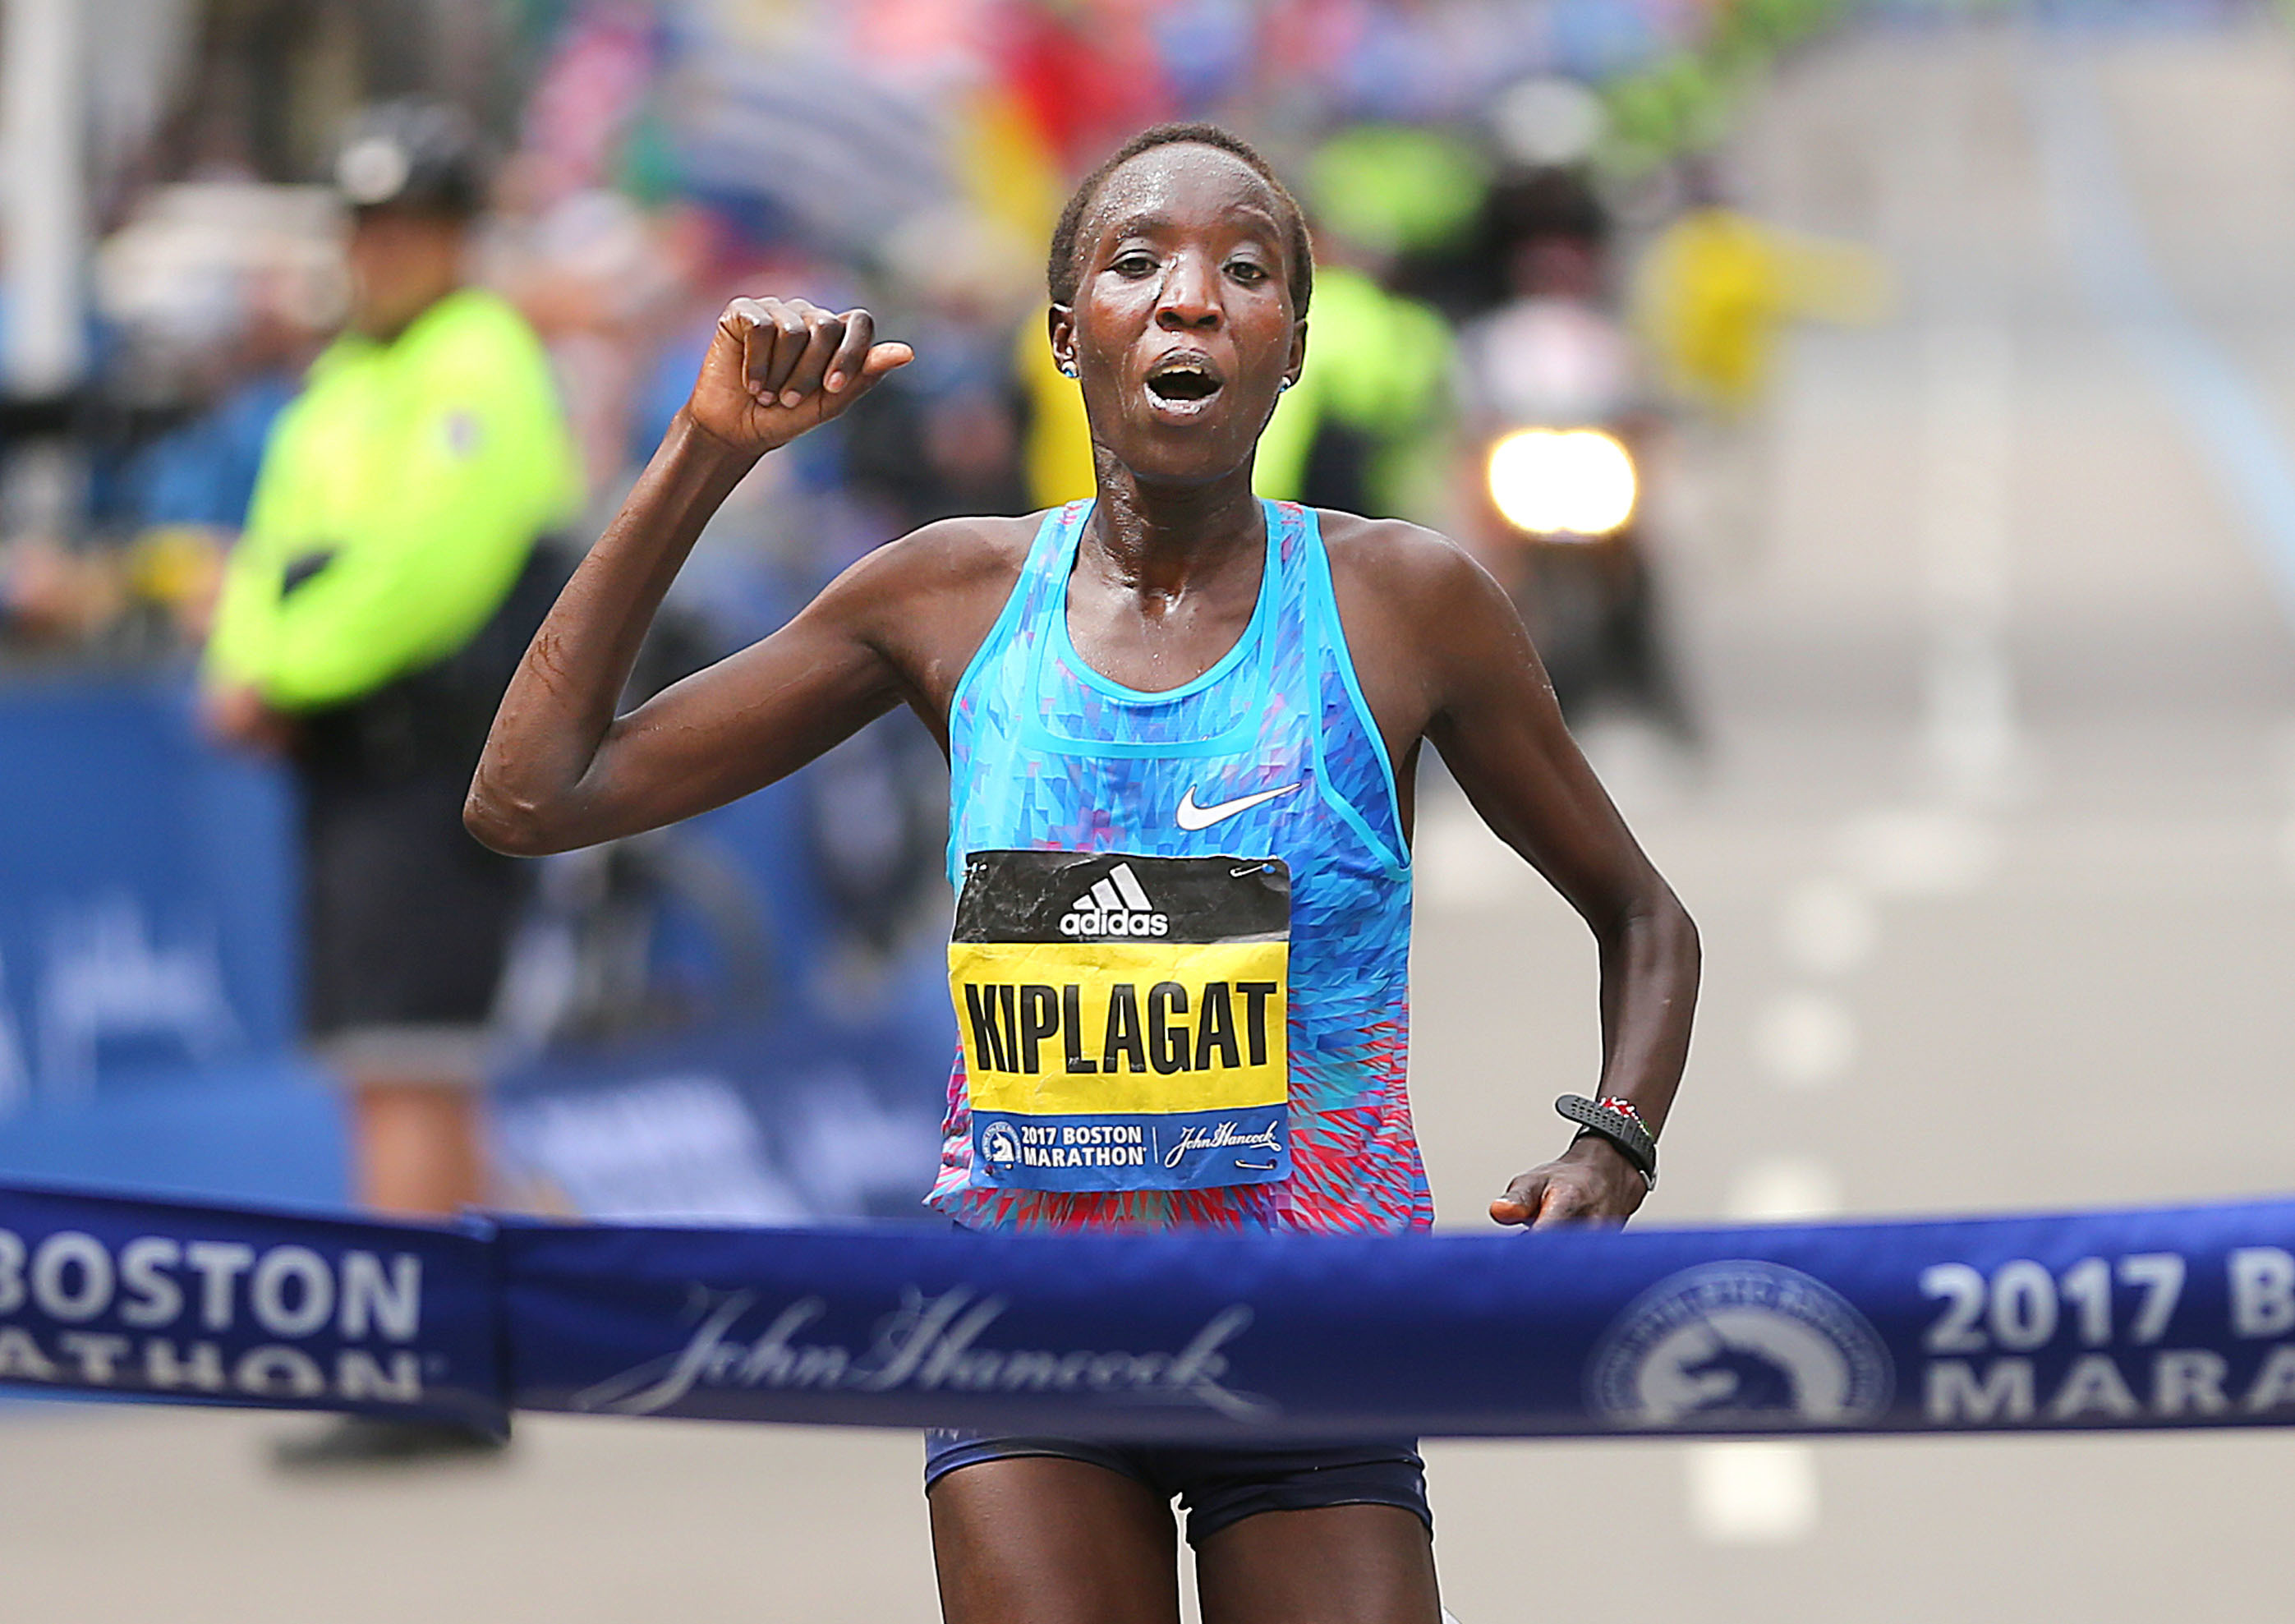 Edna Kiplagat crosses the finish line of the 121st Boston Marathon on April 17. It was her first time running the race.
